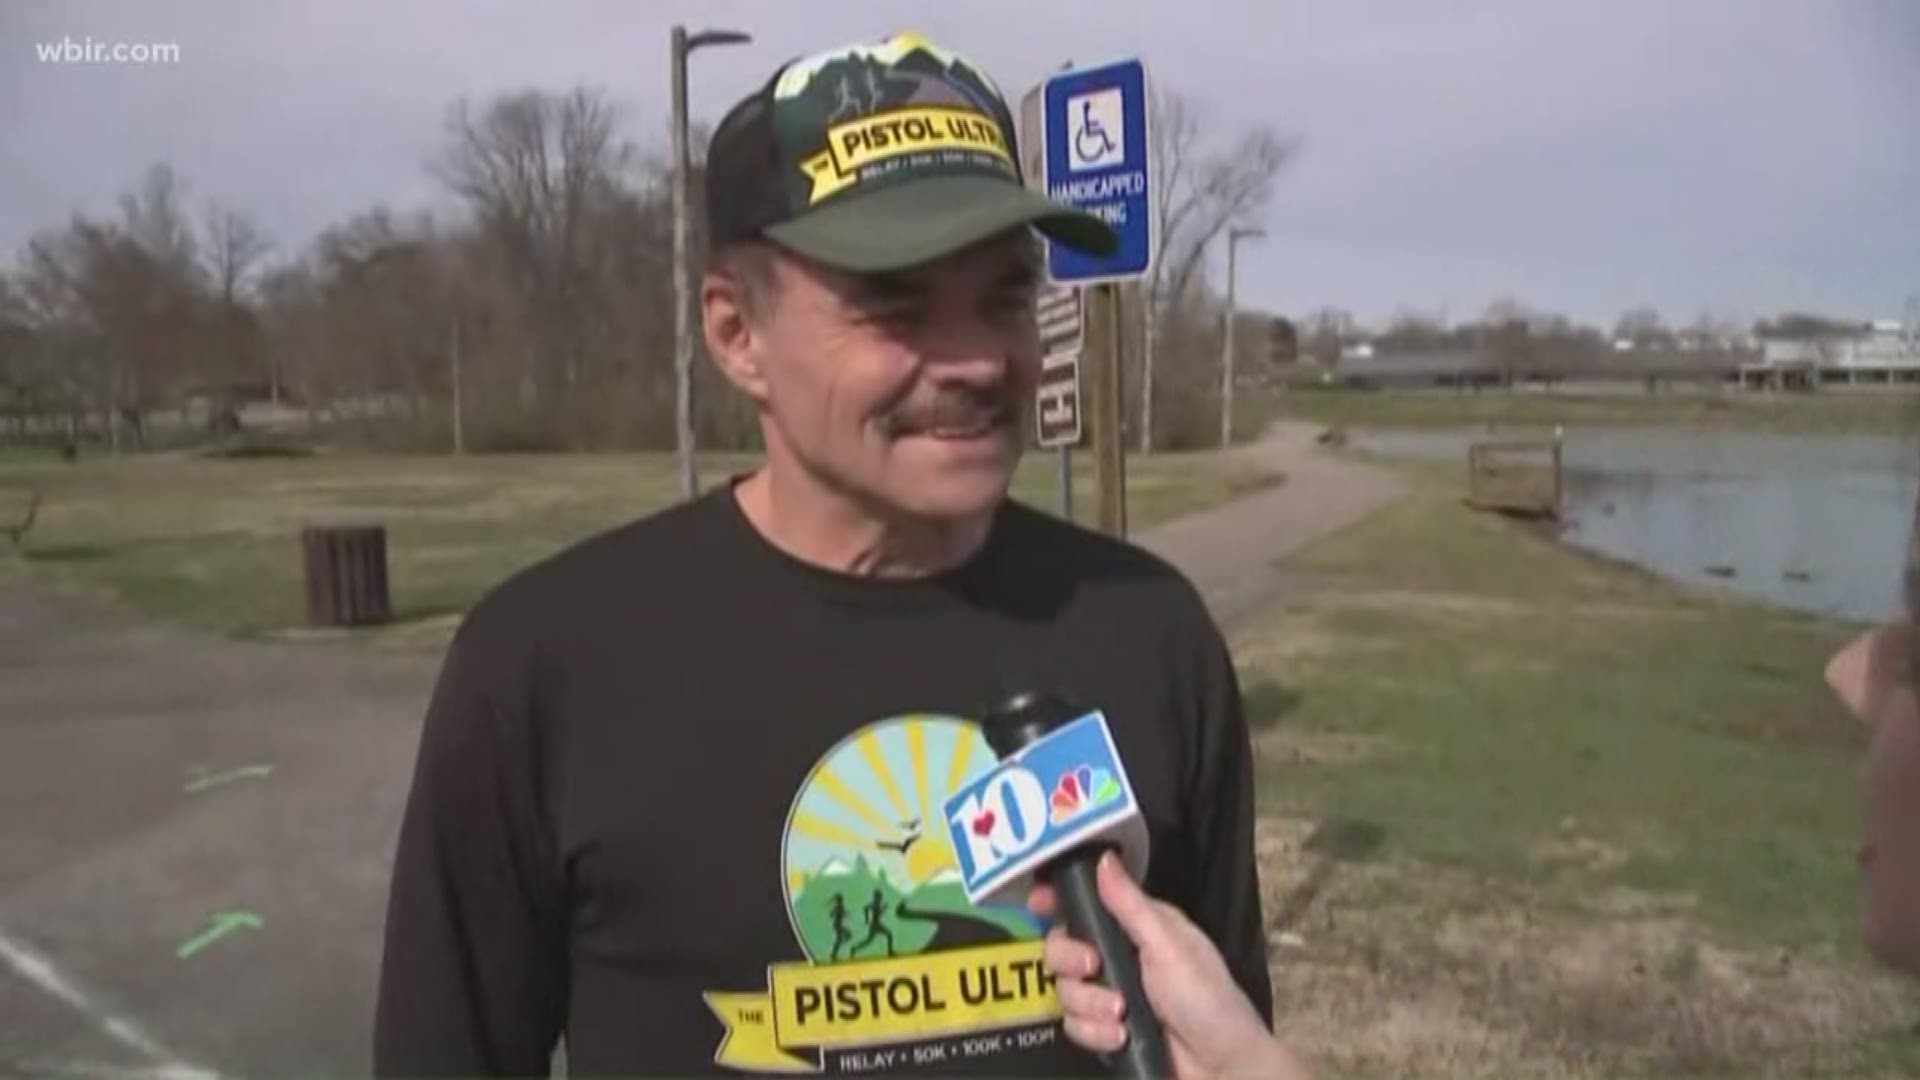 Hundreds of runners will be in Blount County this weekend to run hundreds of miles as part of  the Pistol Ultra Run. The Pistol Ultra Run is March 16 & 17 along the Alcoa-Maryville Greenway. There's still time to register and to volunteer. To learn more visit pistolultra.com. March 12, 2019-4pm